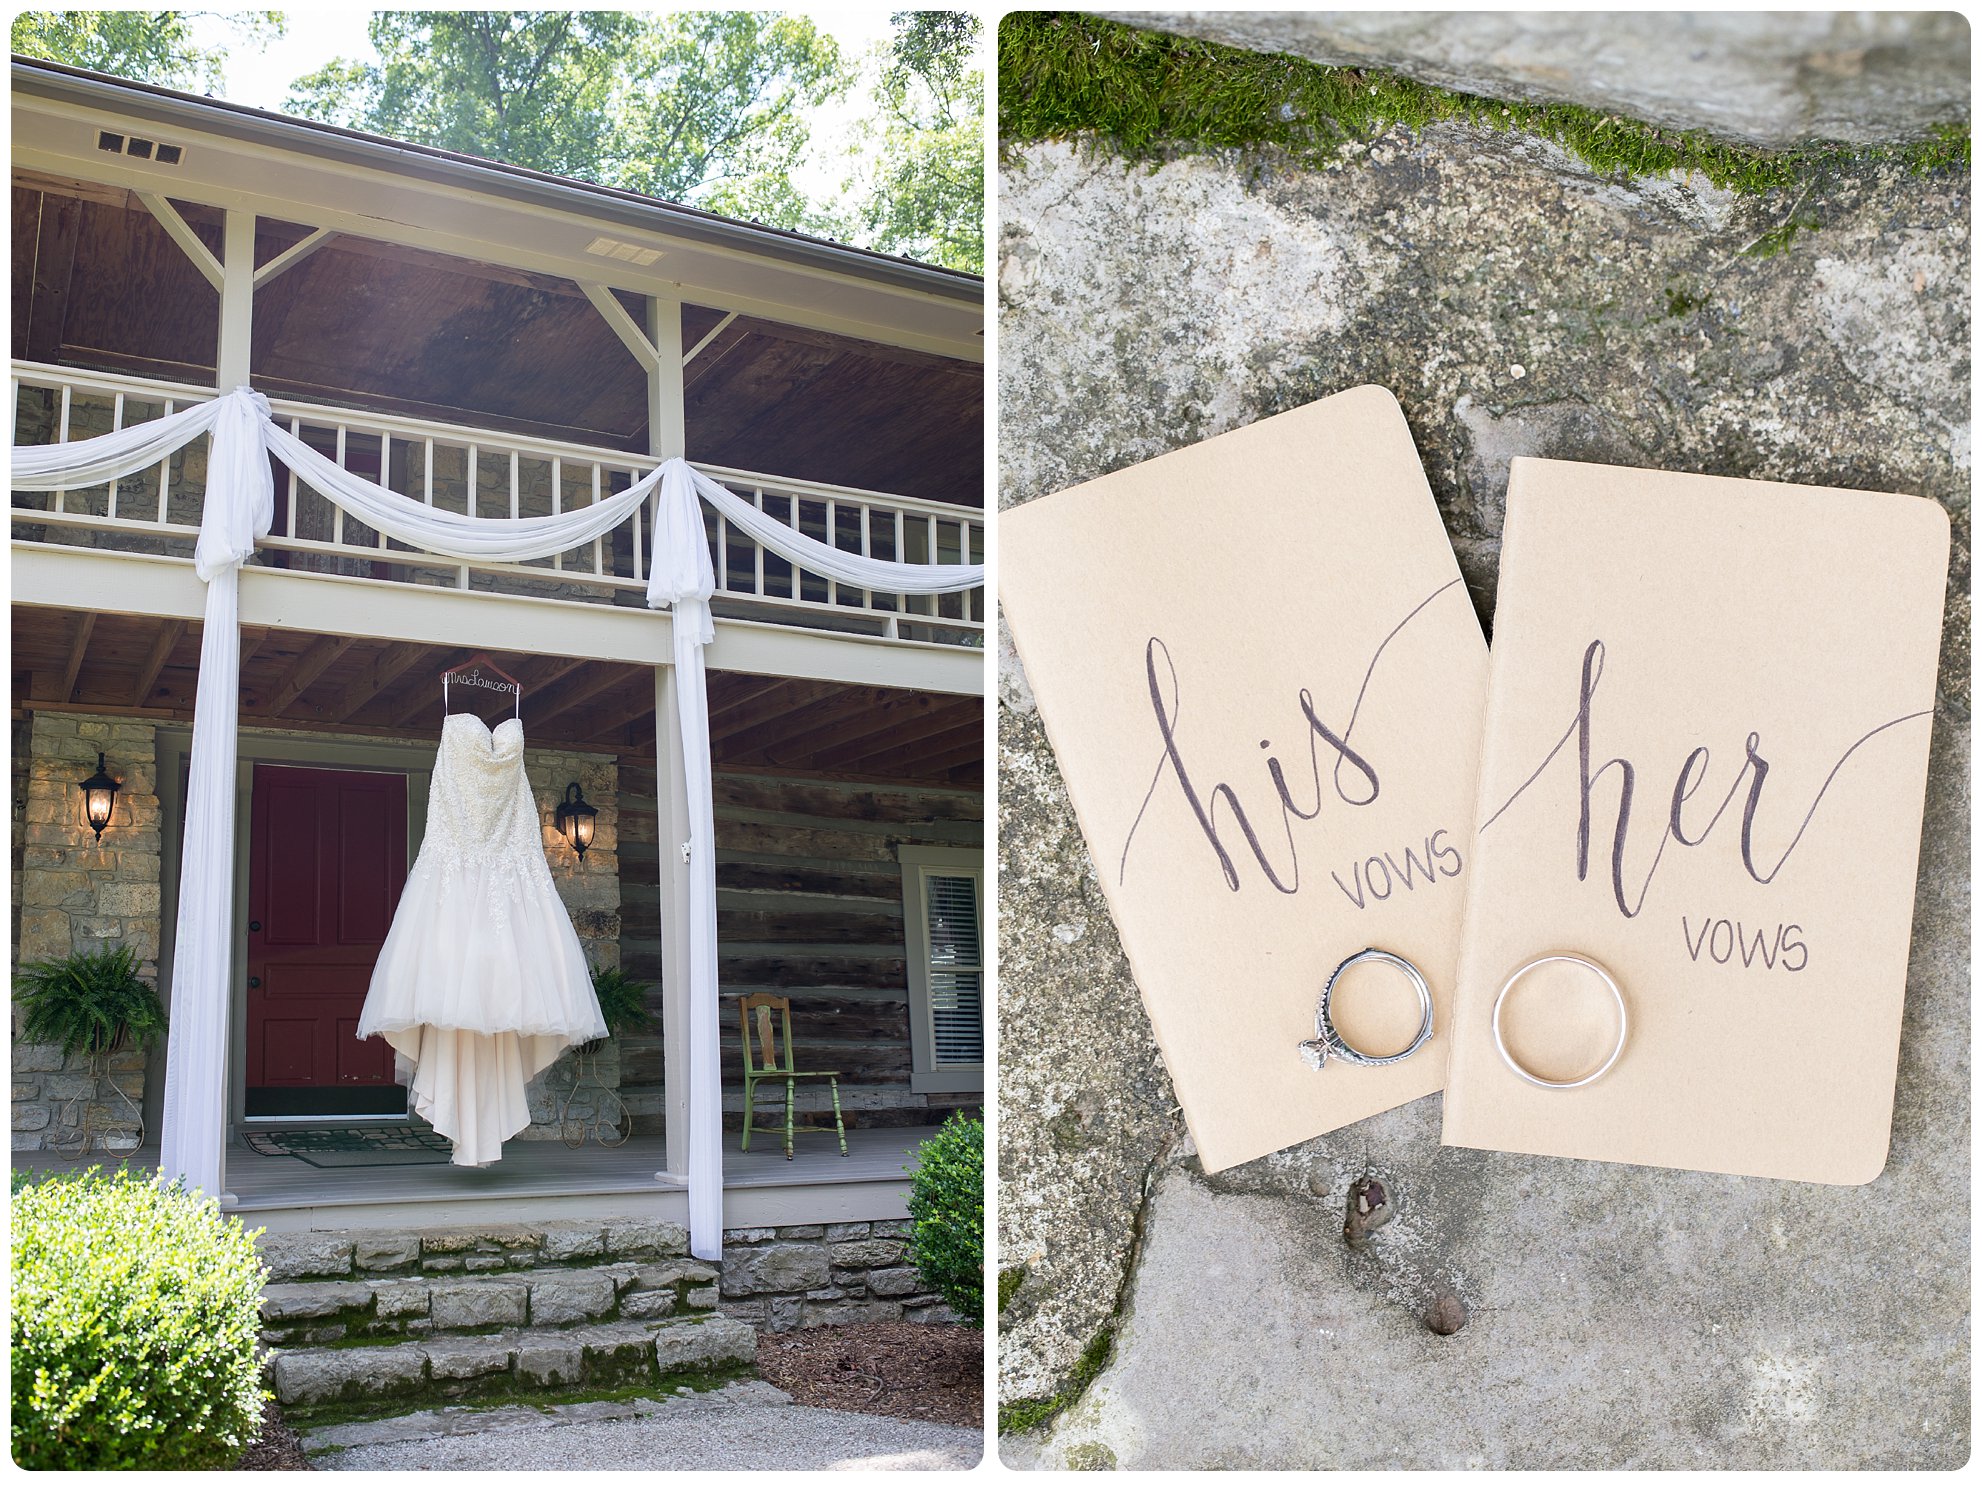 Nashville wedding at Iriswoods, Southern Belles and Blooms, whimsical garden wedding, southern wedding, southern bride, nashville bride, melanie grady photography, the best nashville wedding photographer, interracial couple wedding, mt juliet, 